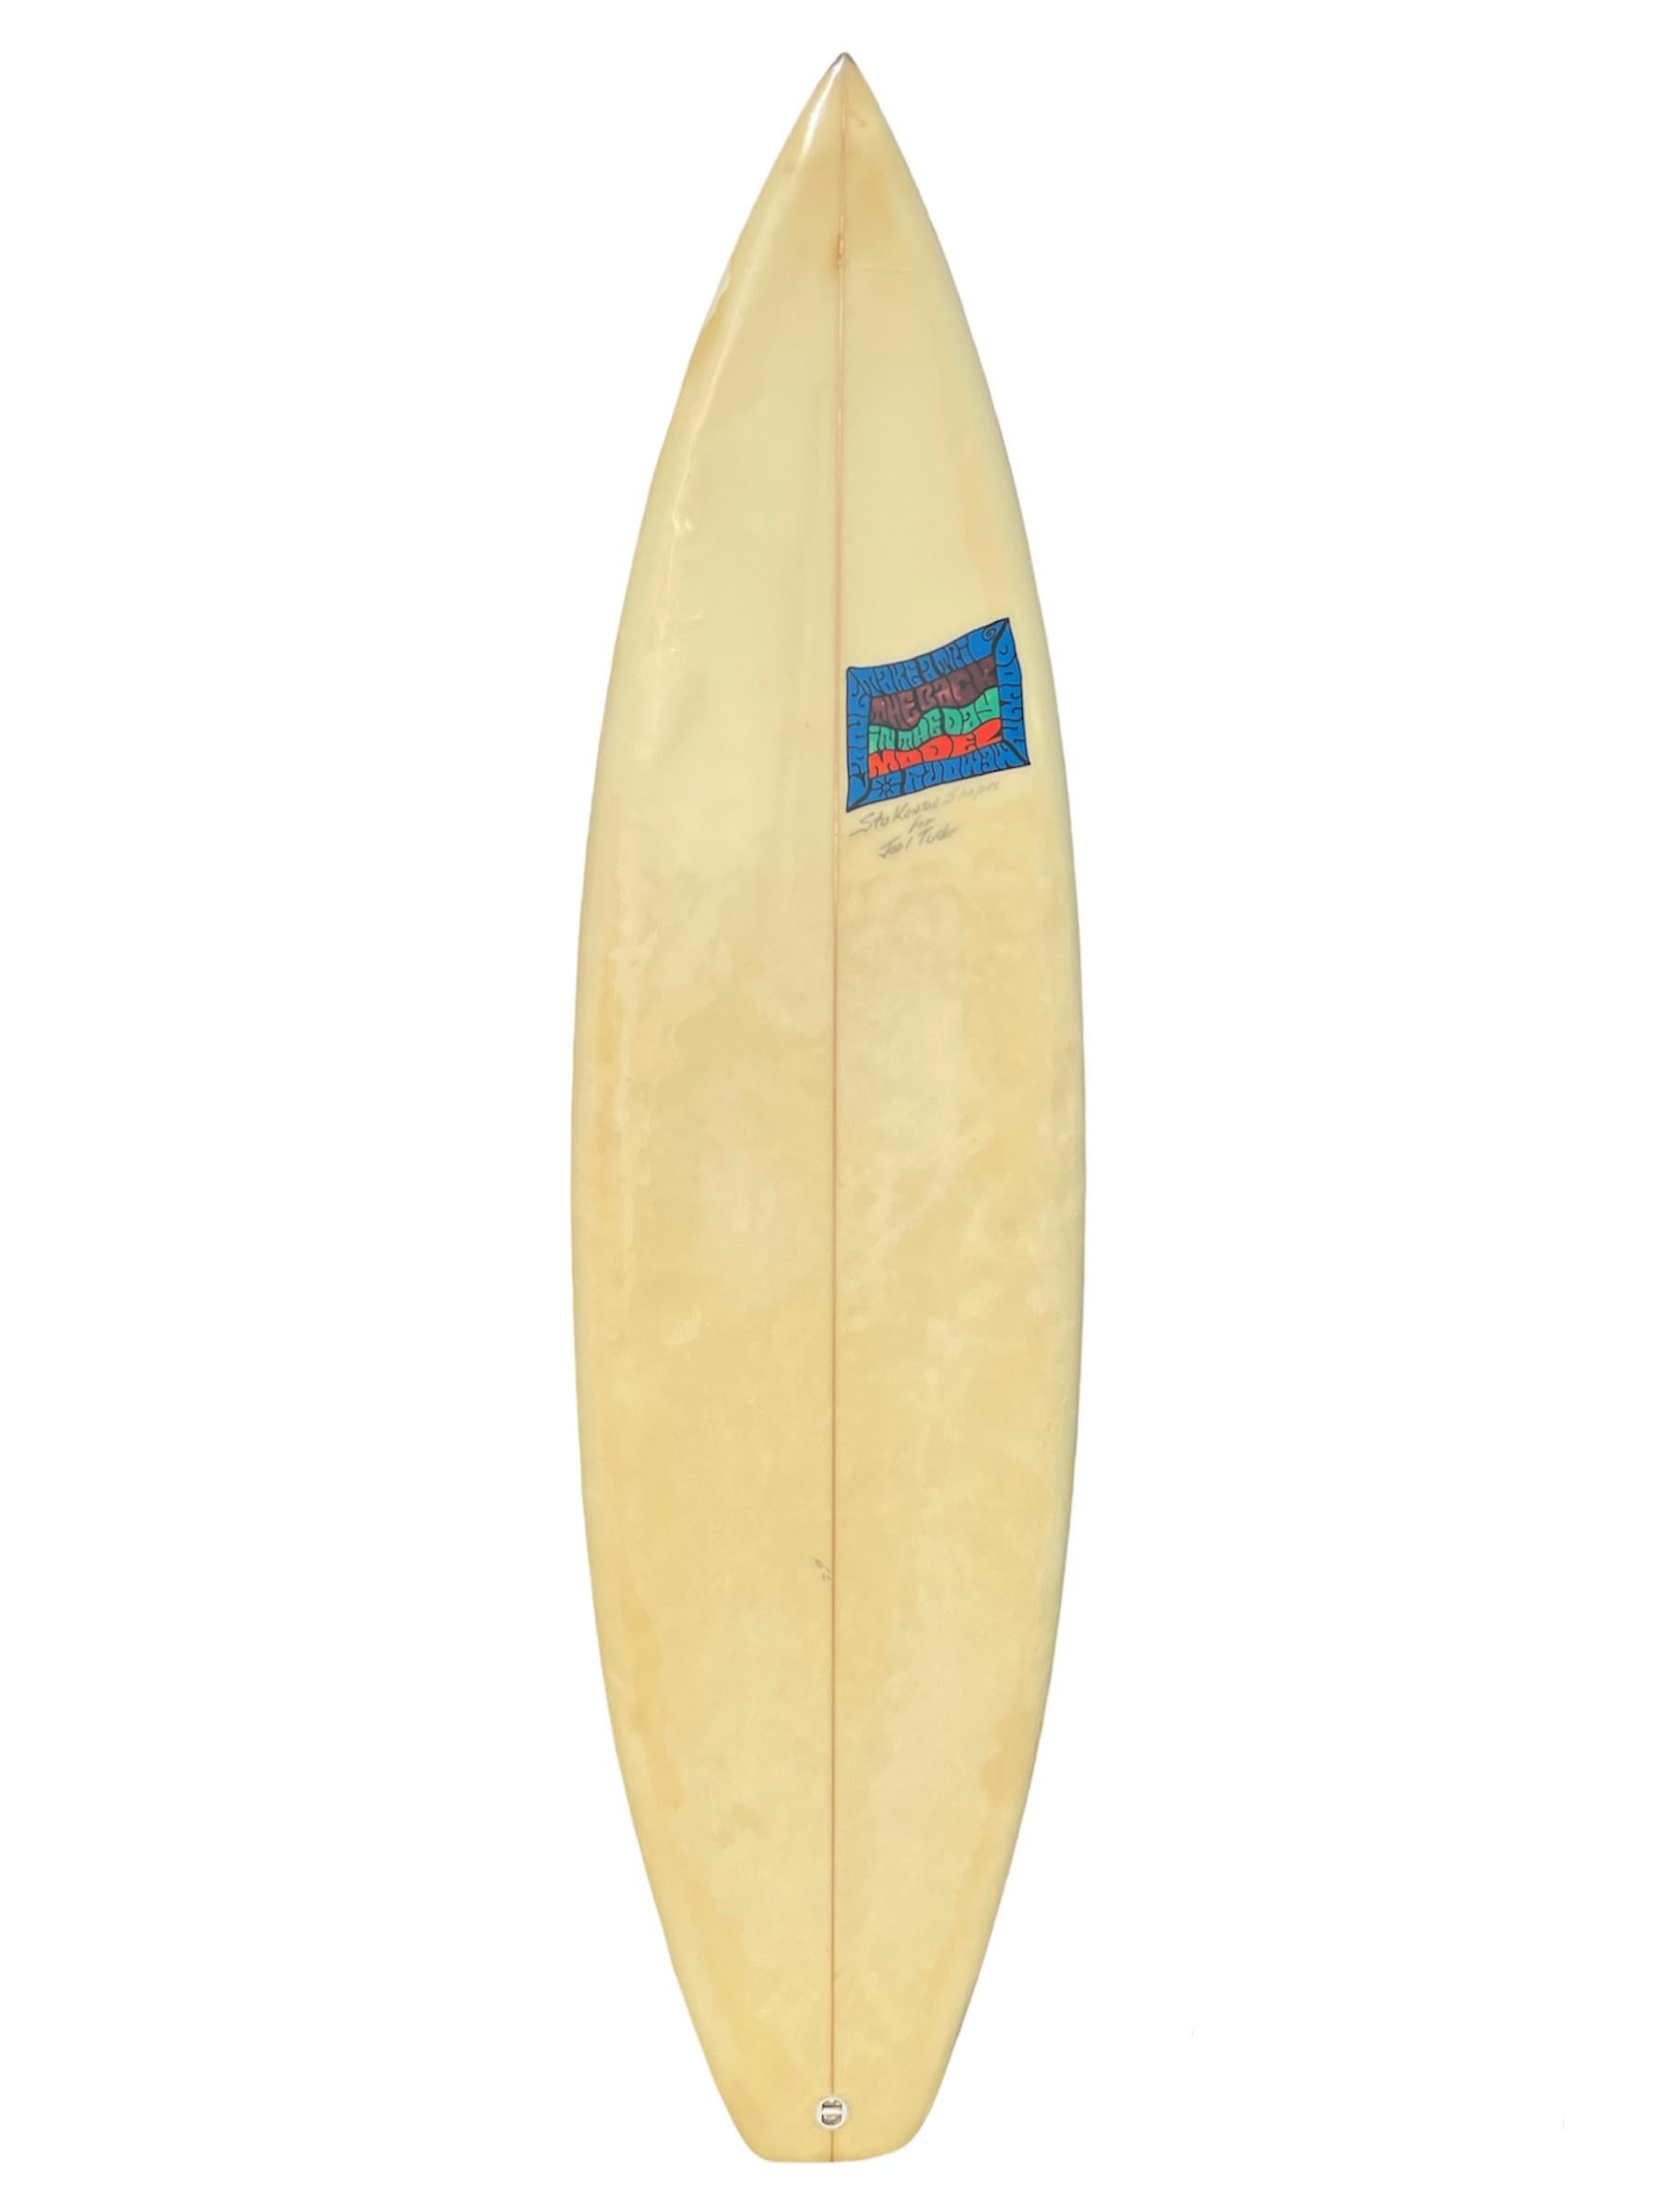 1990s Vintage Joel Tudor personal surfboard shaped by Stu Kenson. Features colorful confetti art design with hand painted logo by Joel Tudor. Glassed on thruster (tri-fin) setup with squash tail. Joel Tudor is currently a 3X Longboard World Champion